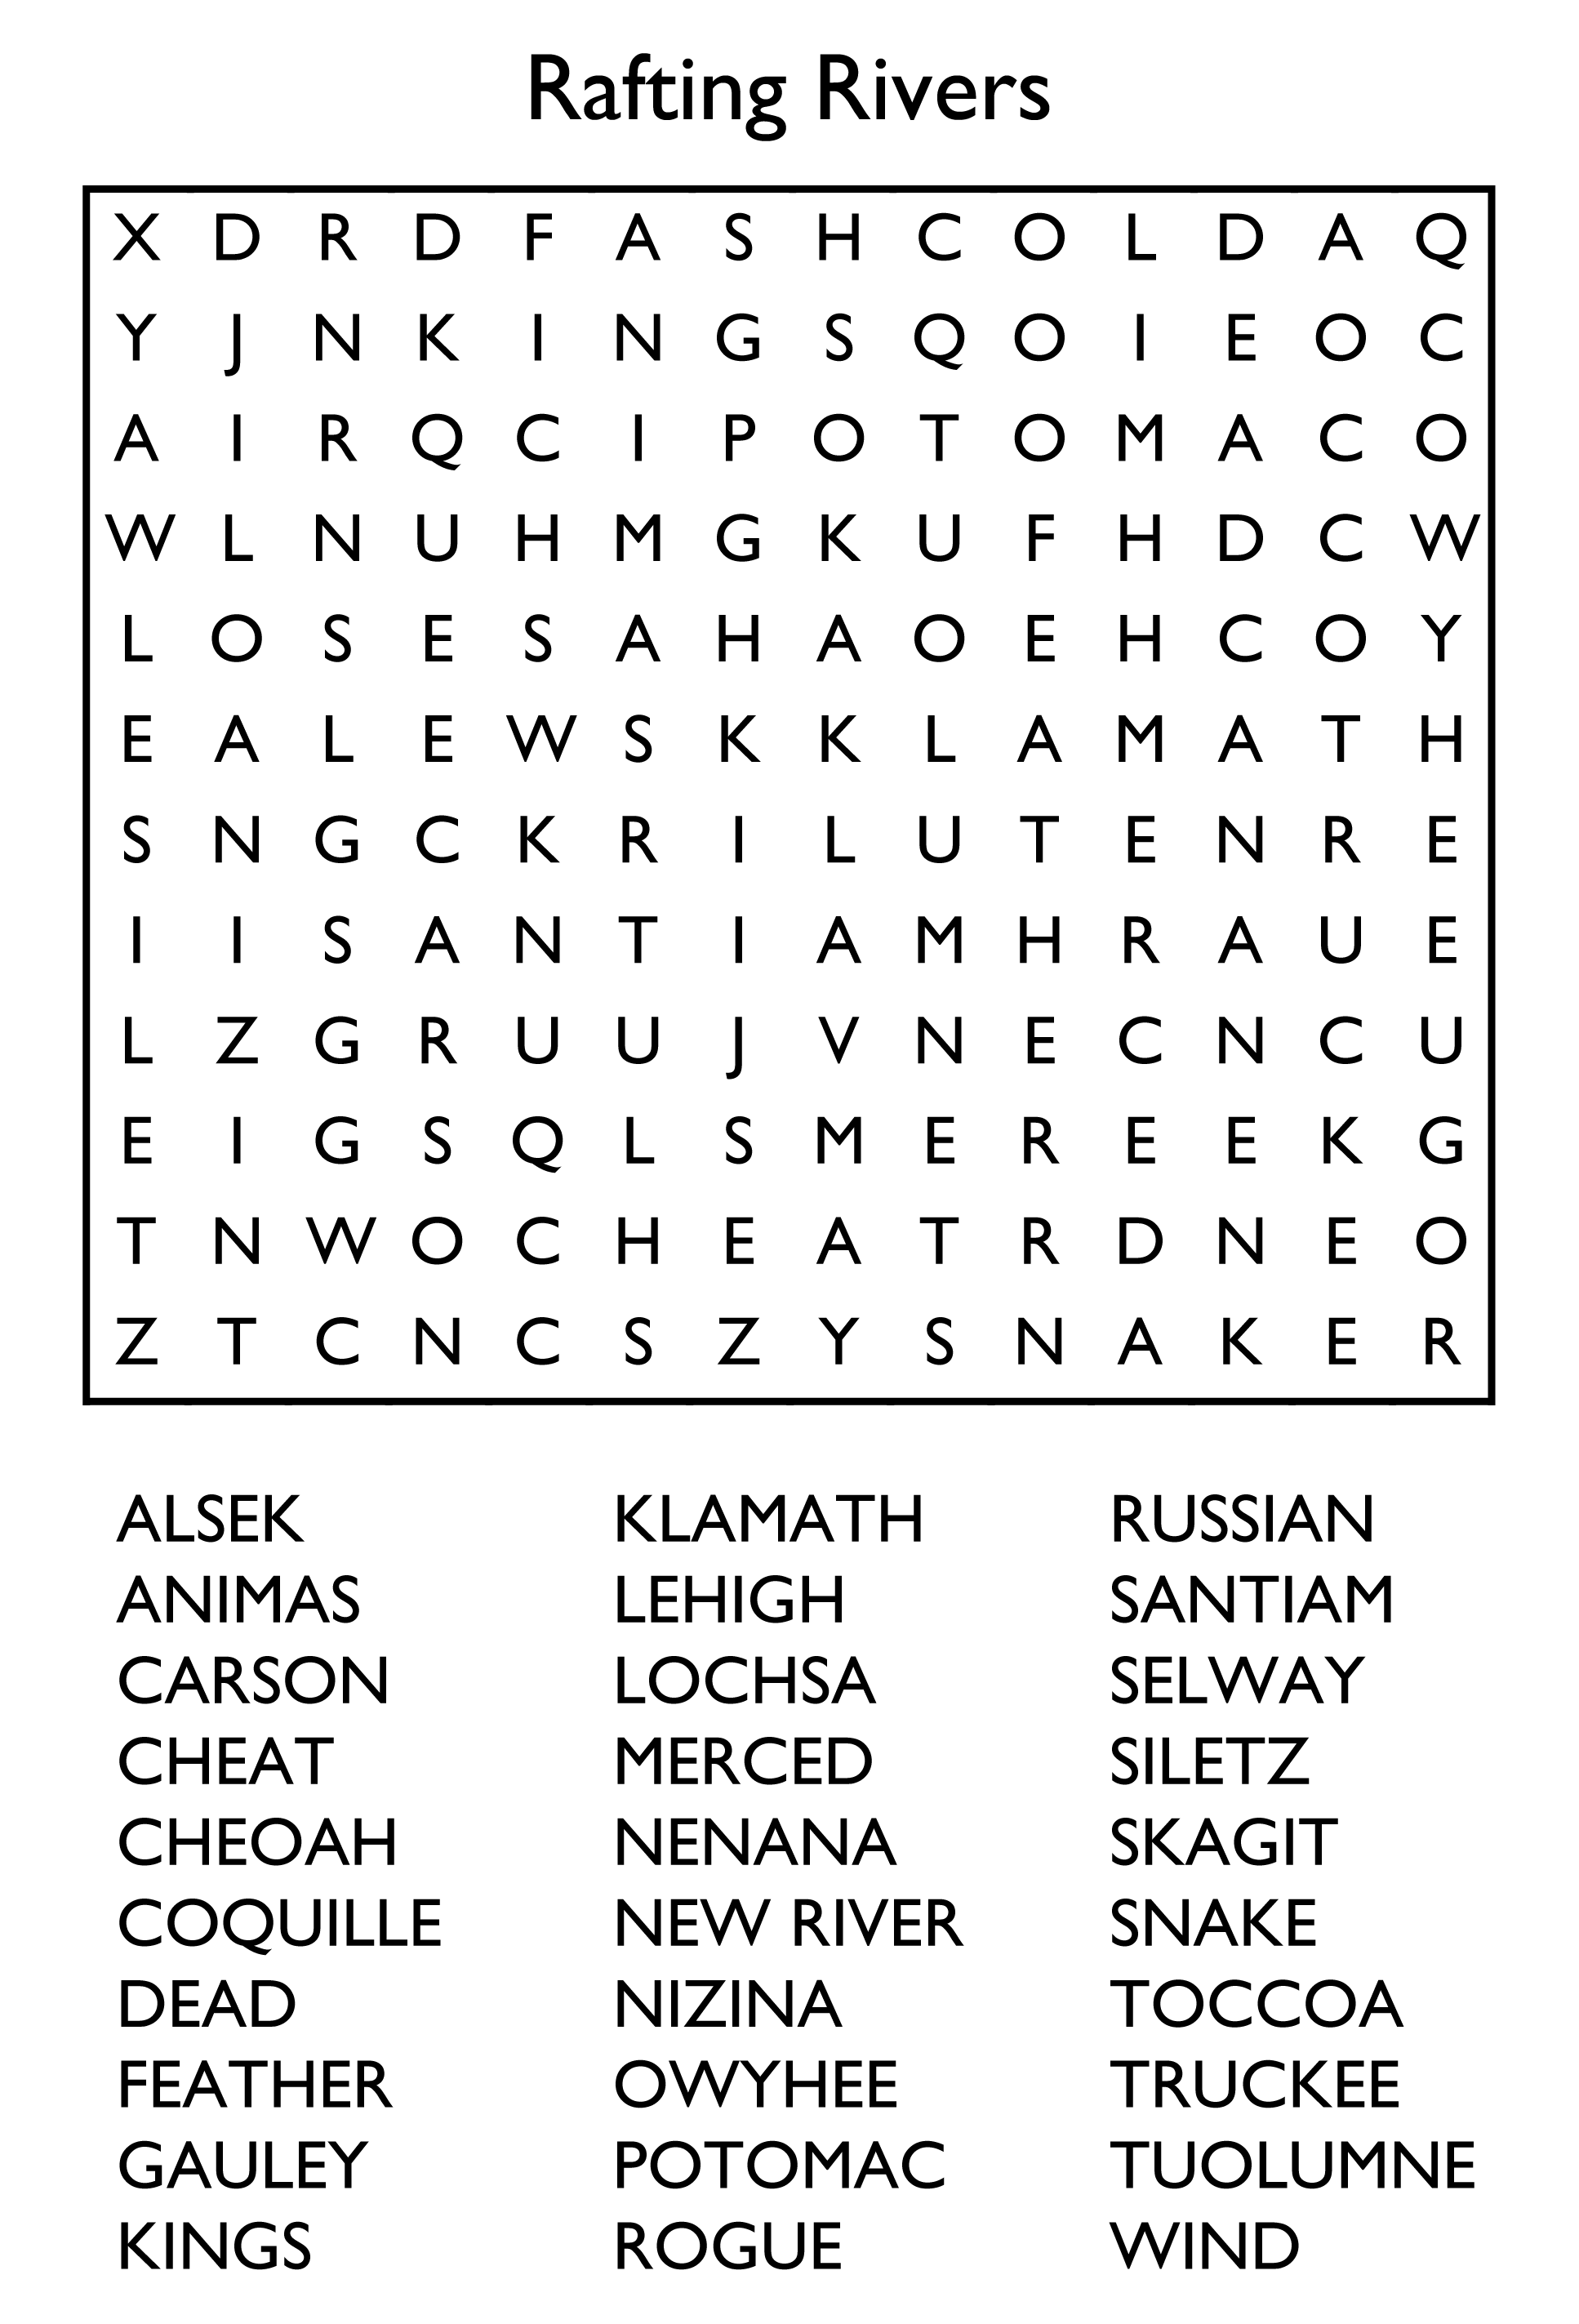 Large Print Word Search Puzzles Online Discount Shop For Electronics Apparel Toys Books Games Computers Shoes Jewelry Watches Baby Products Sports Outdoors Office Products Bed Bath Furniture Tools Hardware Automotive Parts